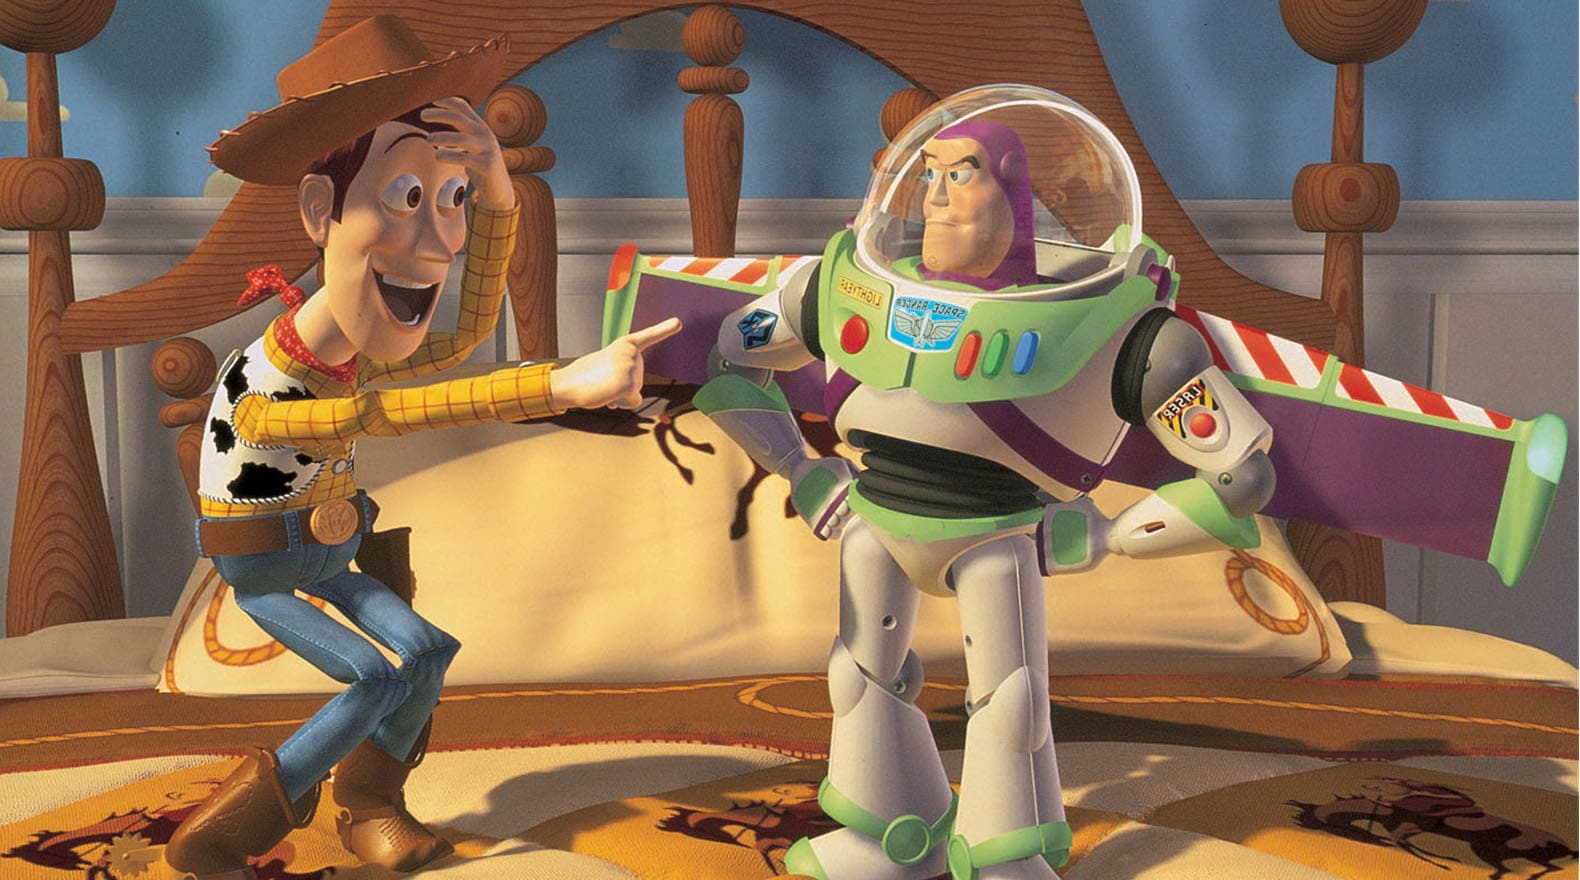 Woody mocks Buzz Lightyear on Andy's bed in Toy Story 1